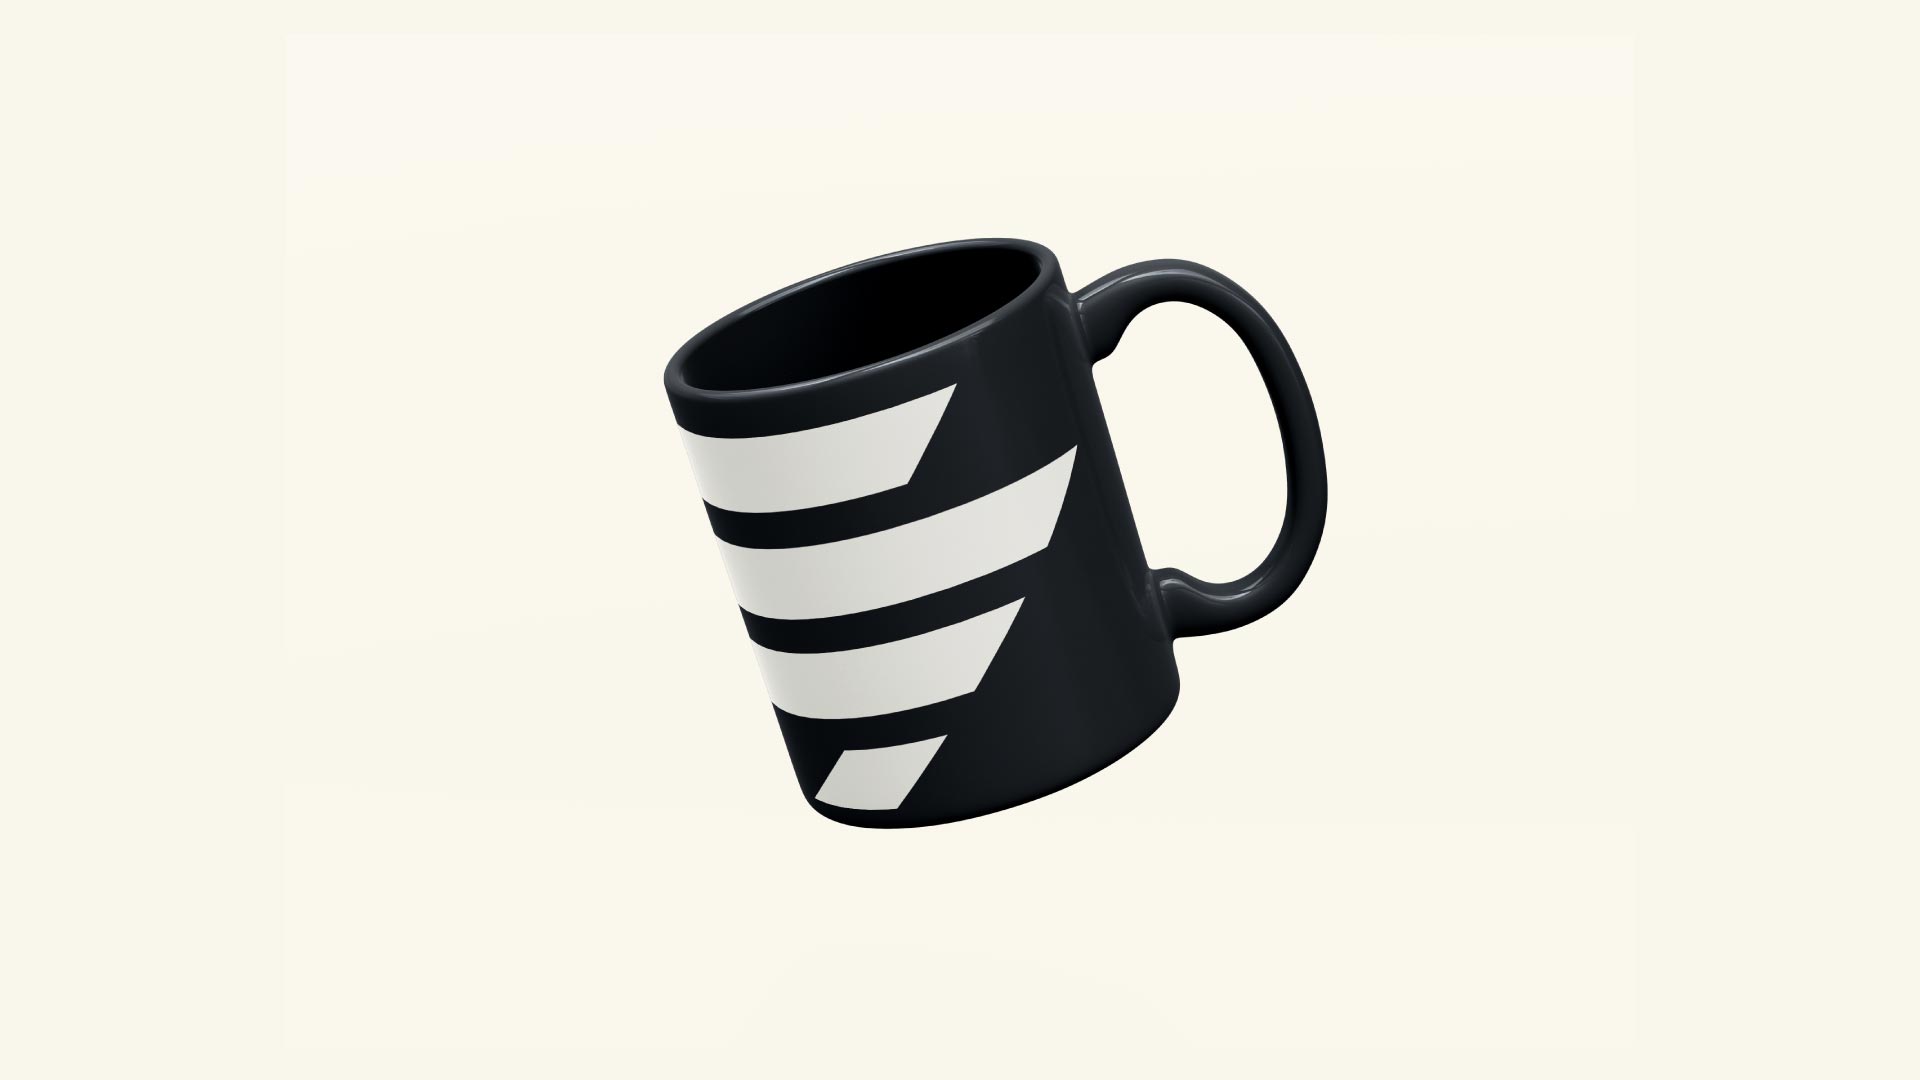 ColdFusion branded merchandise; mug design featuring the diamond icon wrapping around the mug, white on a black background.